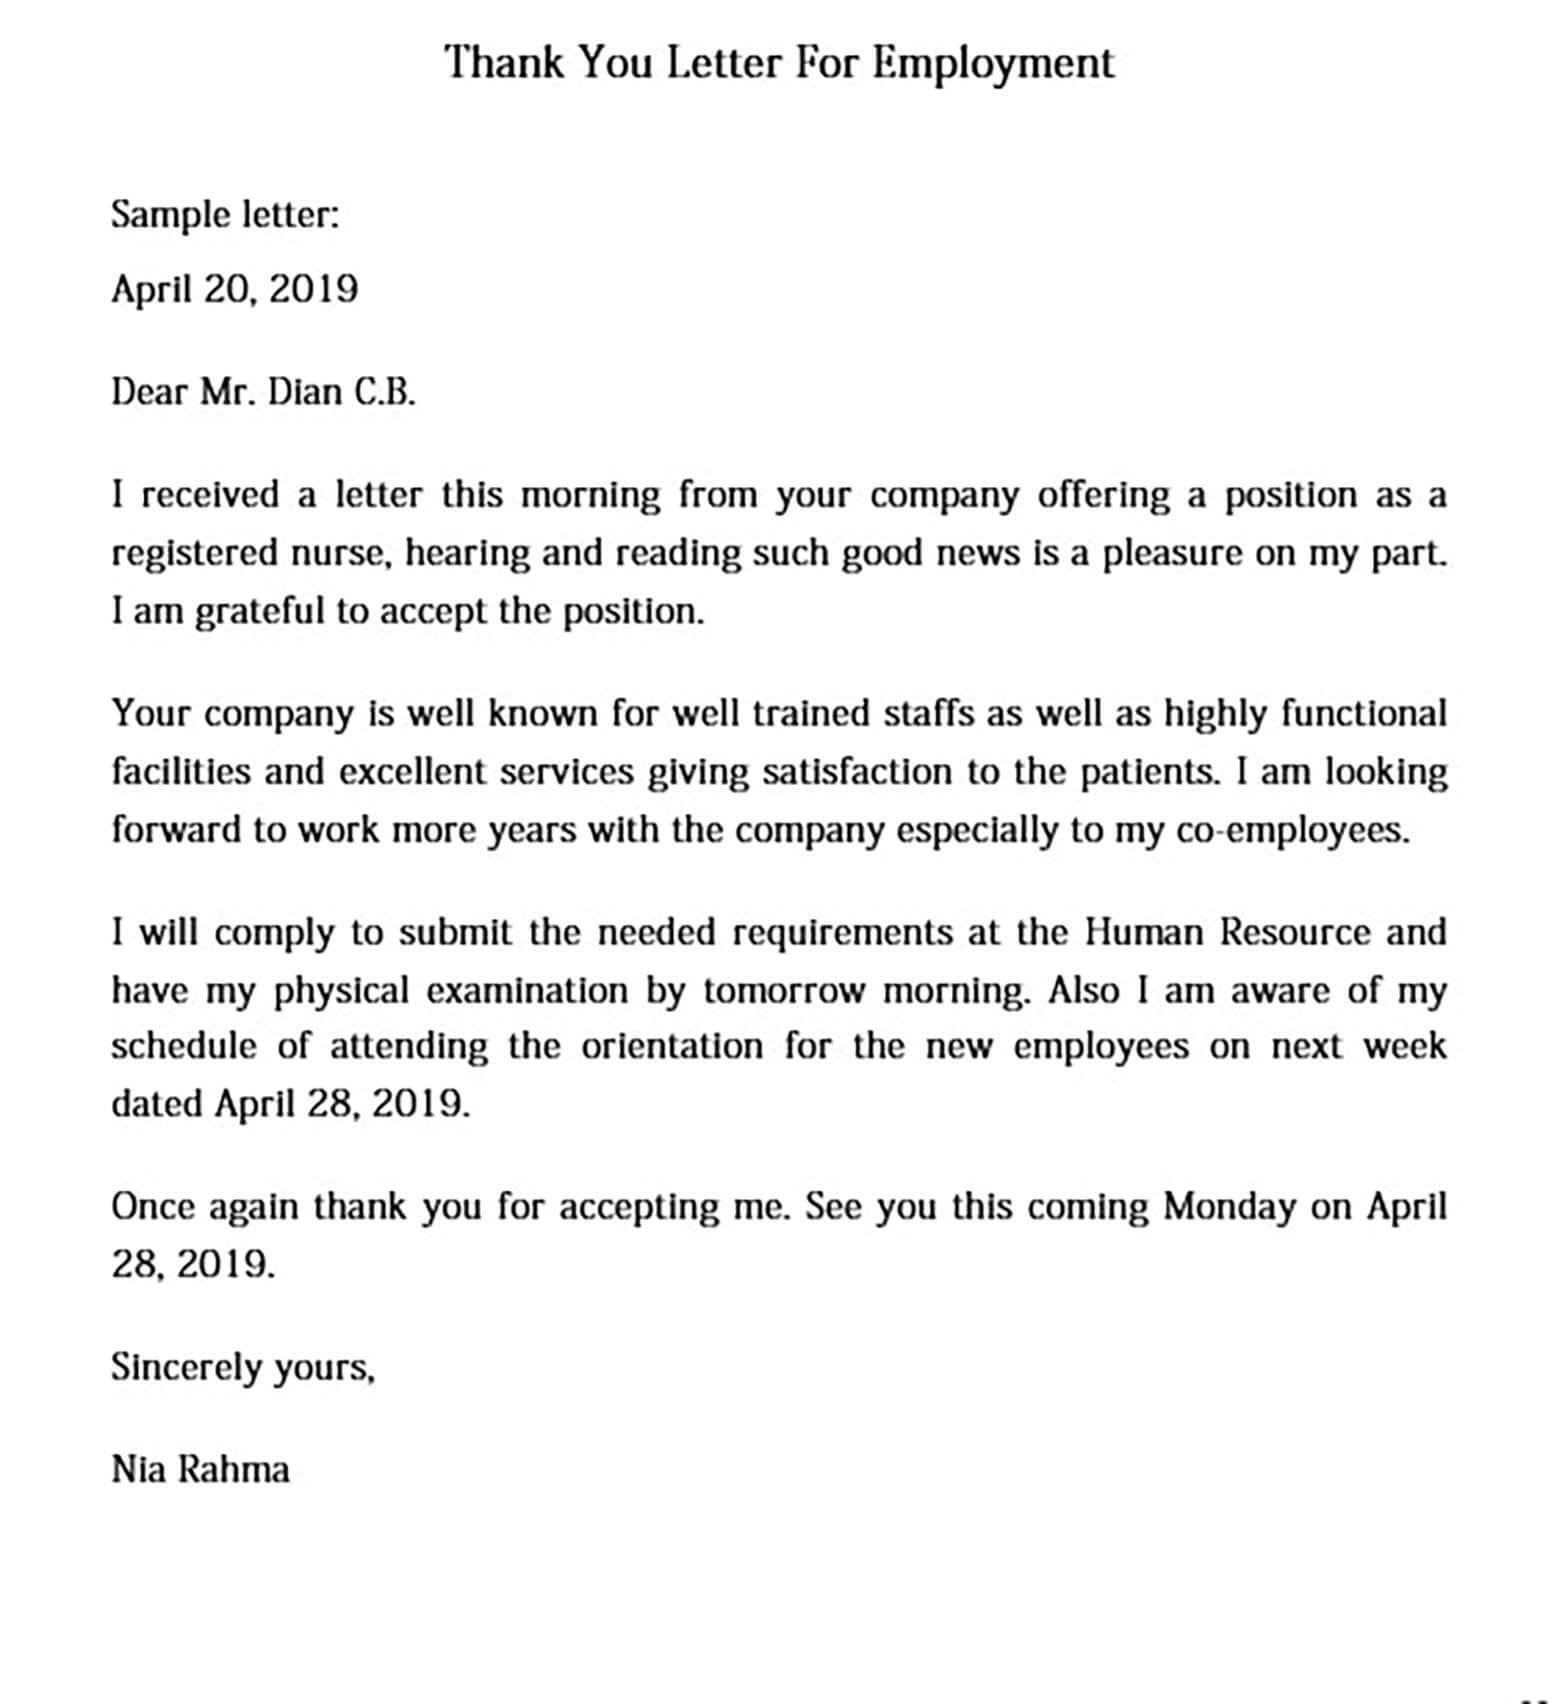 Thank You Letter For Employment